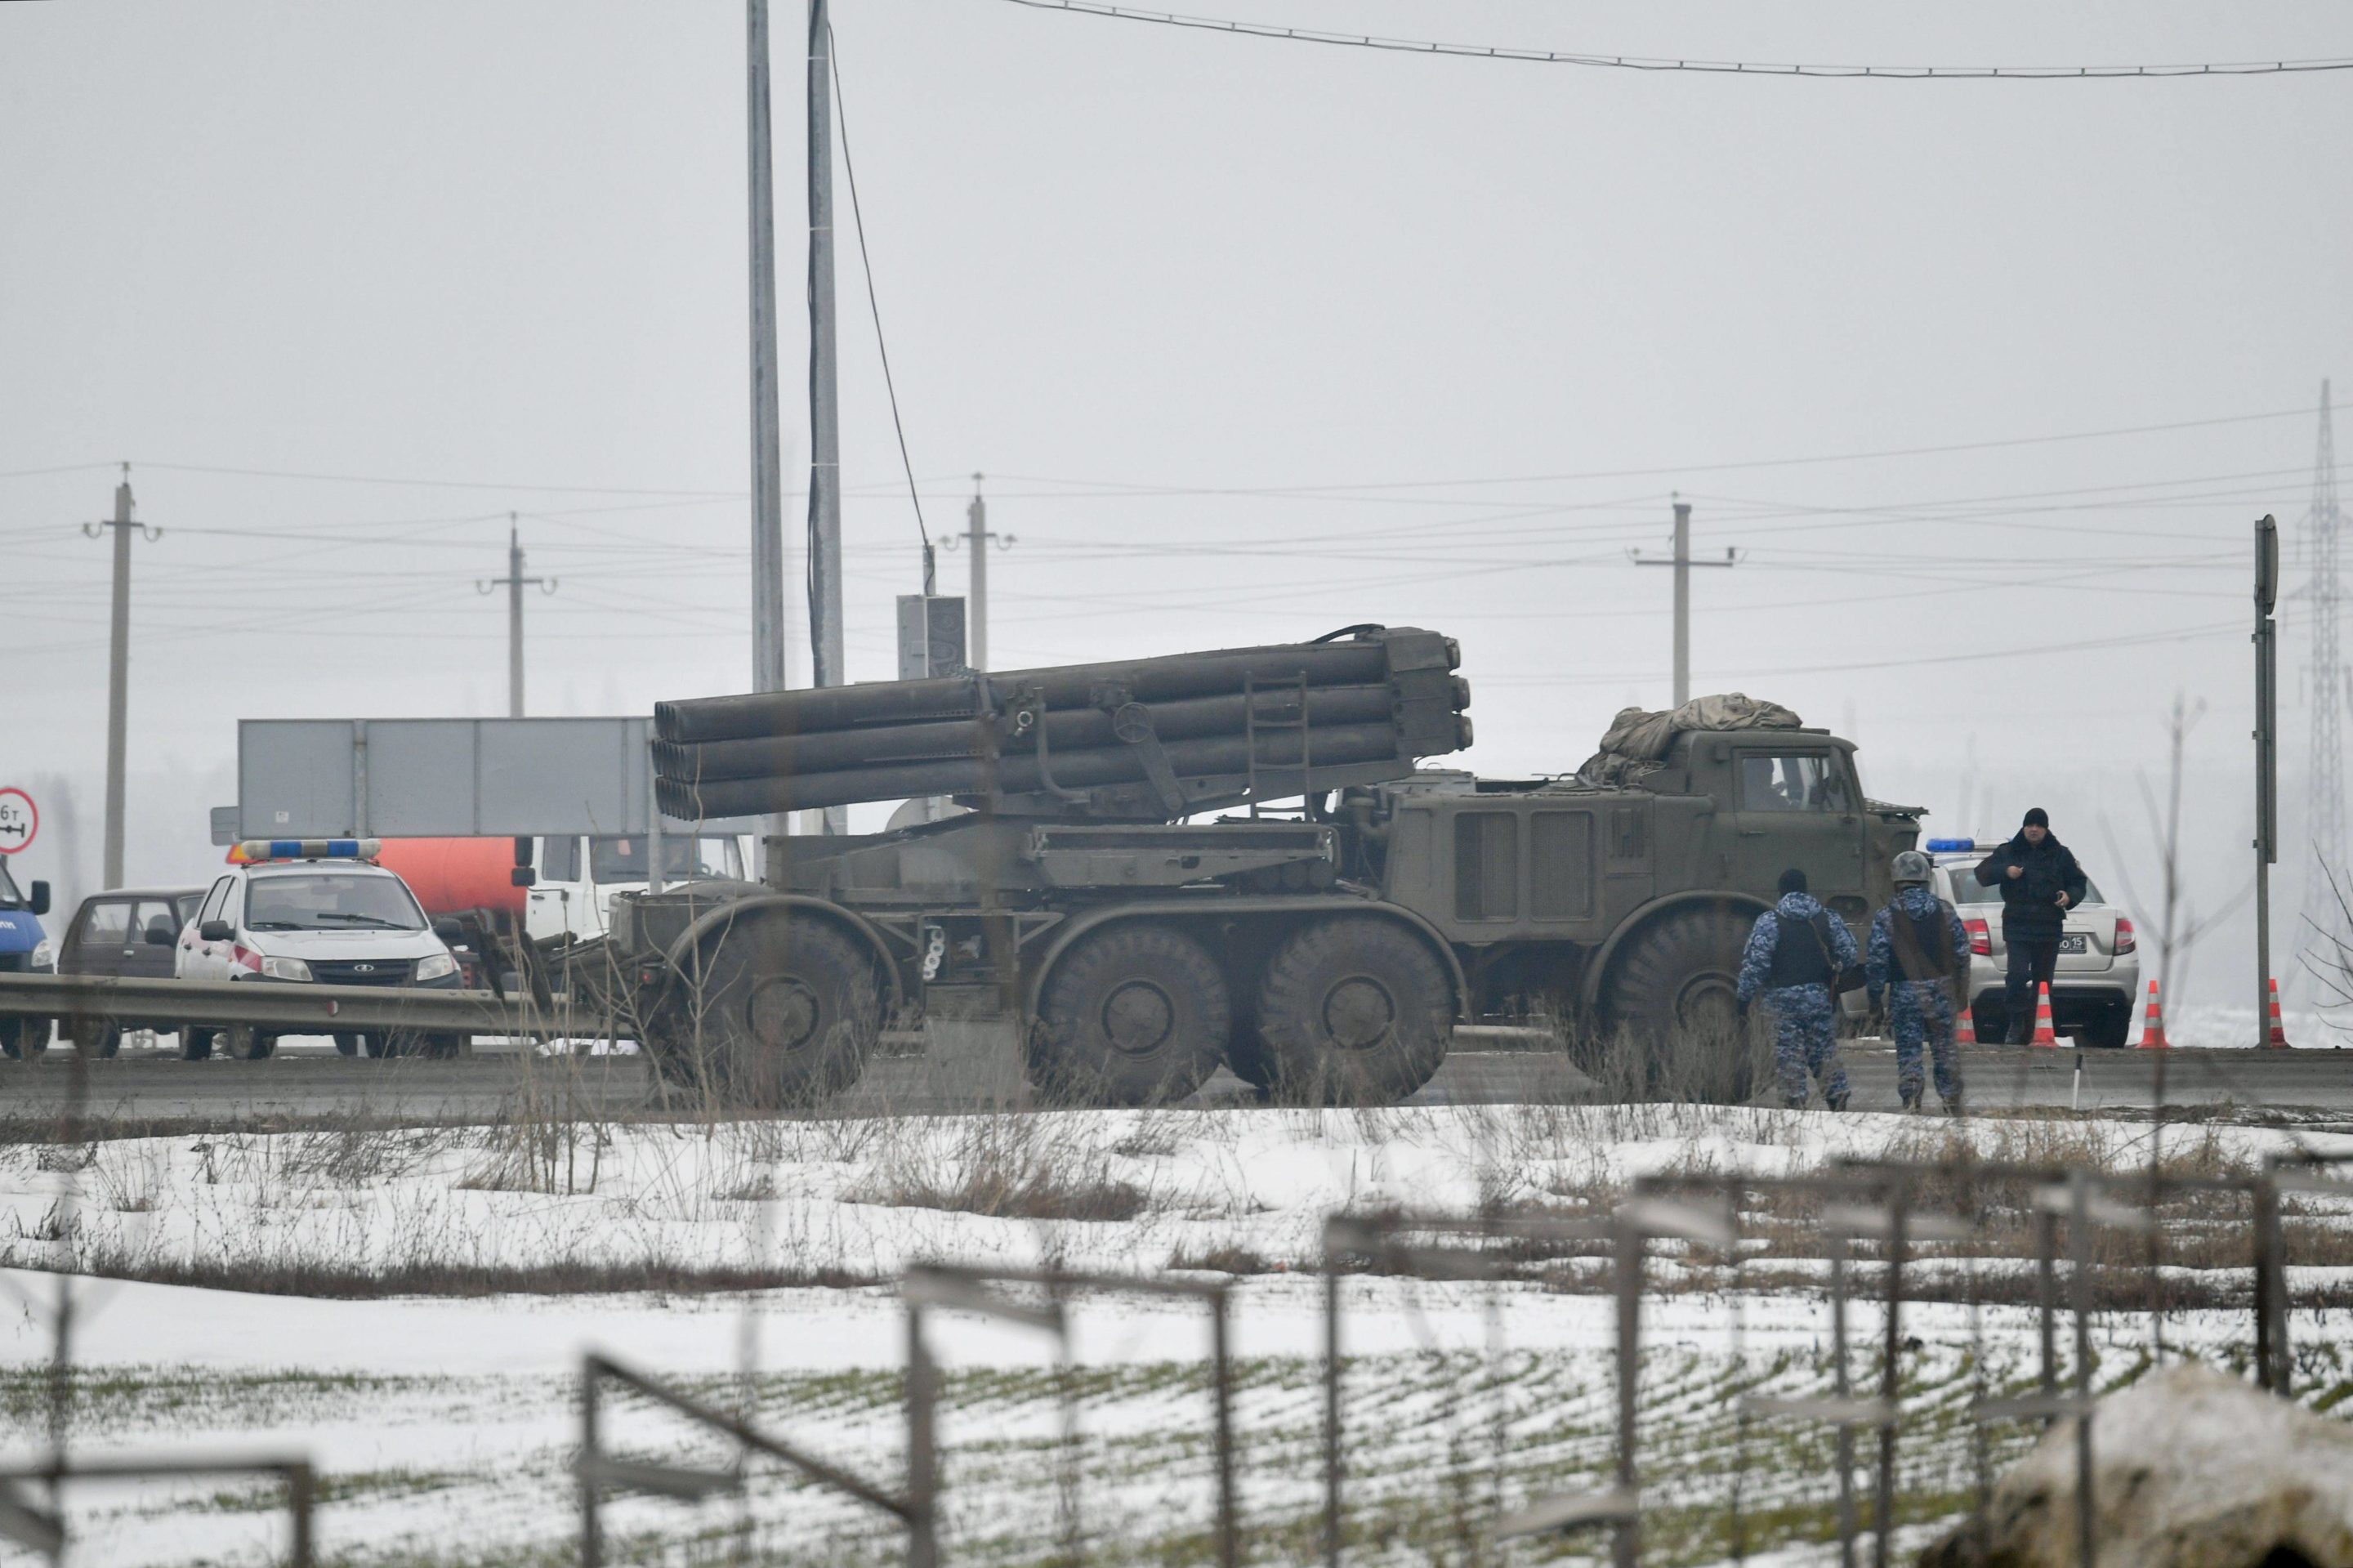 BM-27 Uragan (9P140) self-propelled multiple rocket launcher system moves along a road near the border with Ukraine in Belgorod region, Russia.  Mikhail Voskresenskiy Credit:Mikhail Voskresenskiy/SPU/SIPA/2203010929